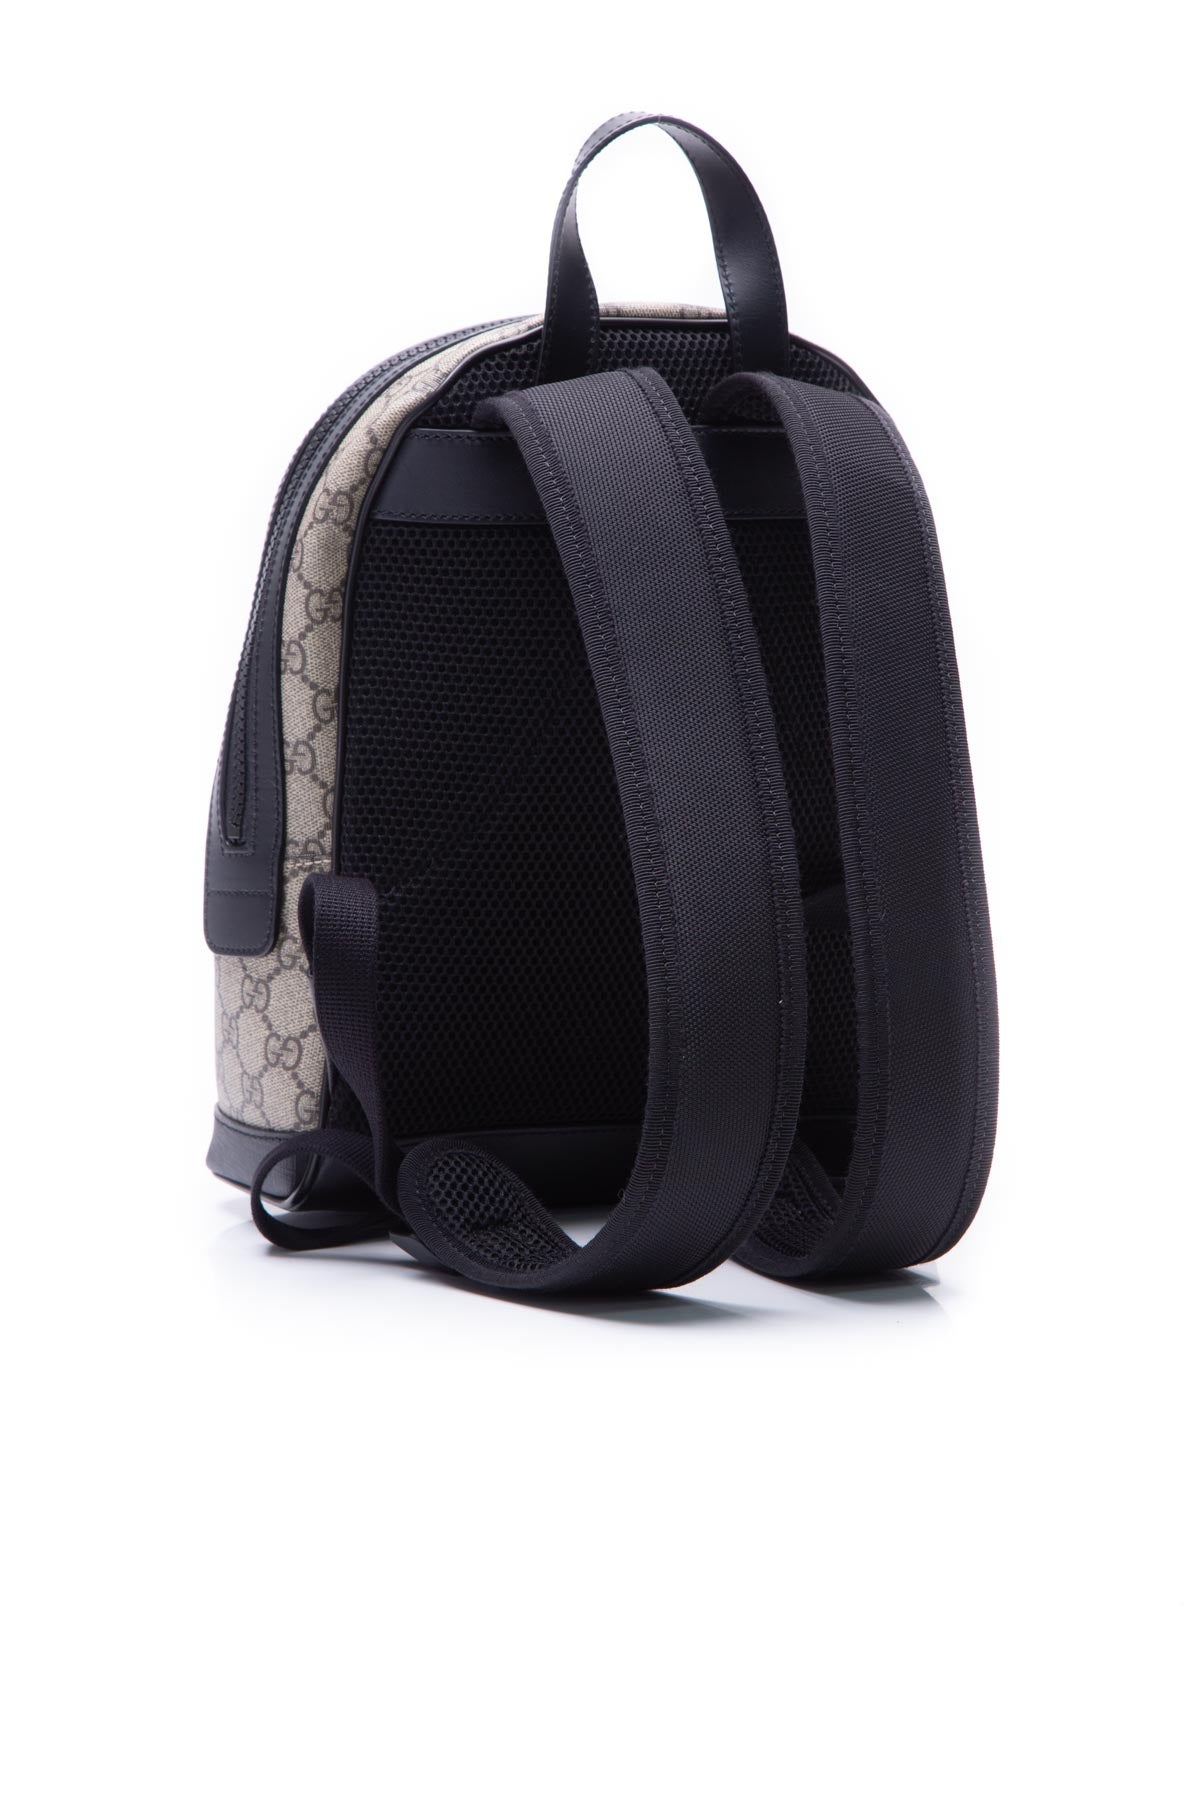 Gucci, Bags, Gucci Eden Small Backpack